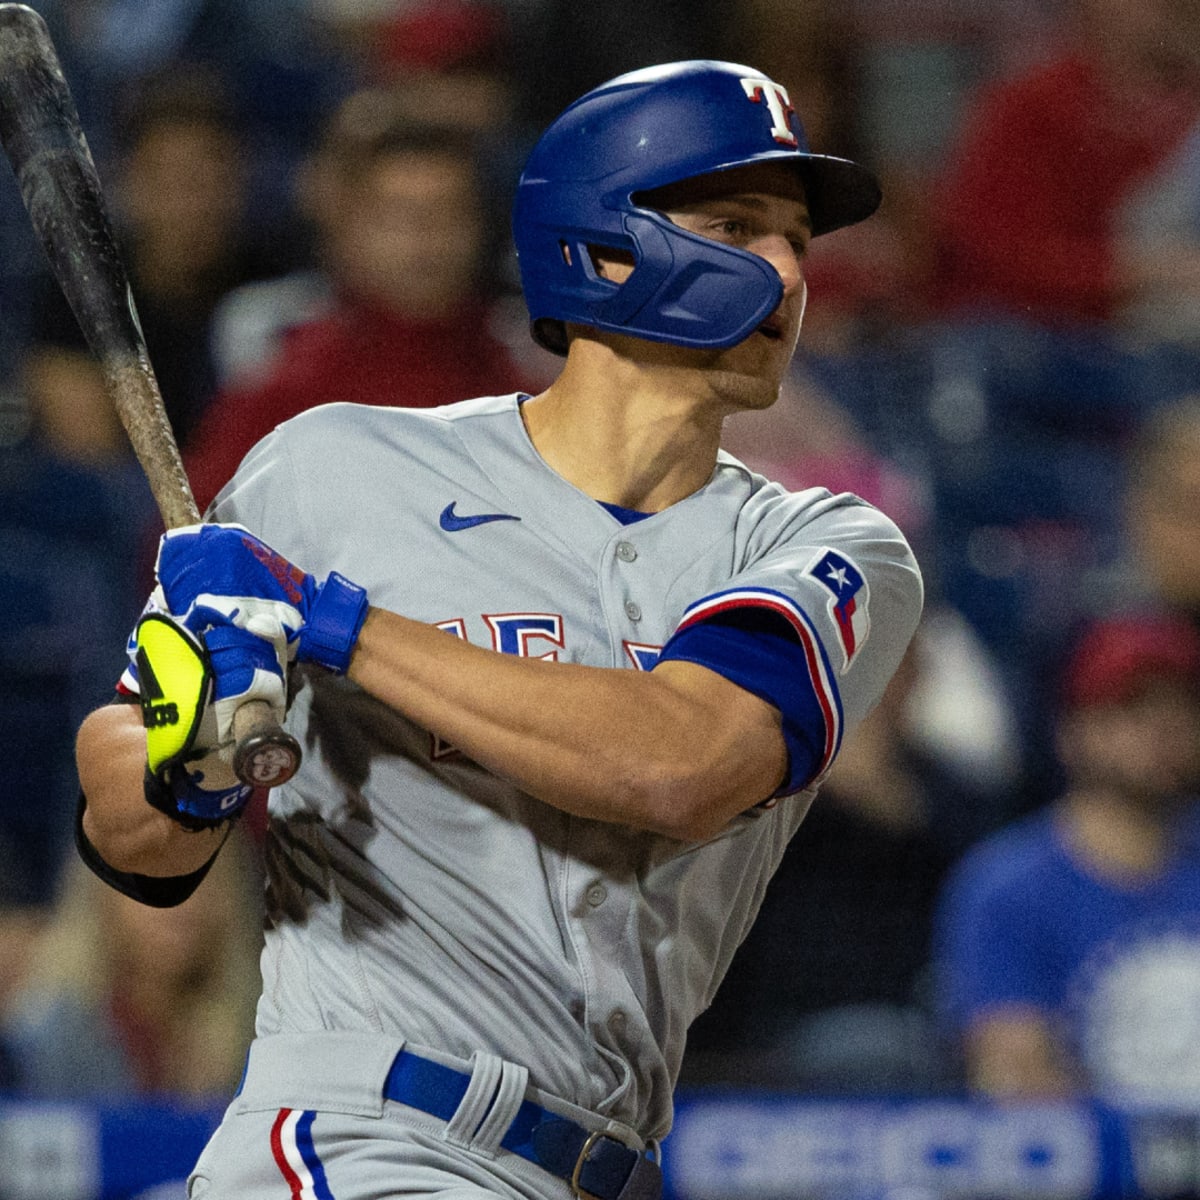 Corey Seager Career High, Rangers Down Rays, DFW Pro Sports